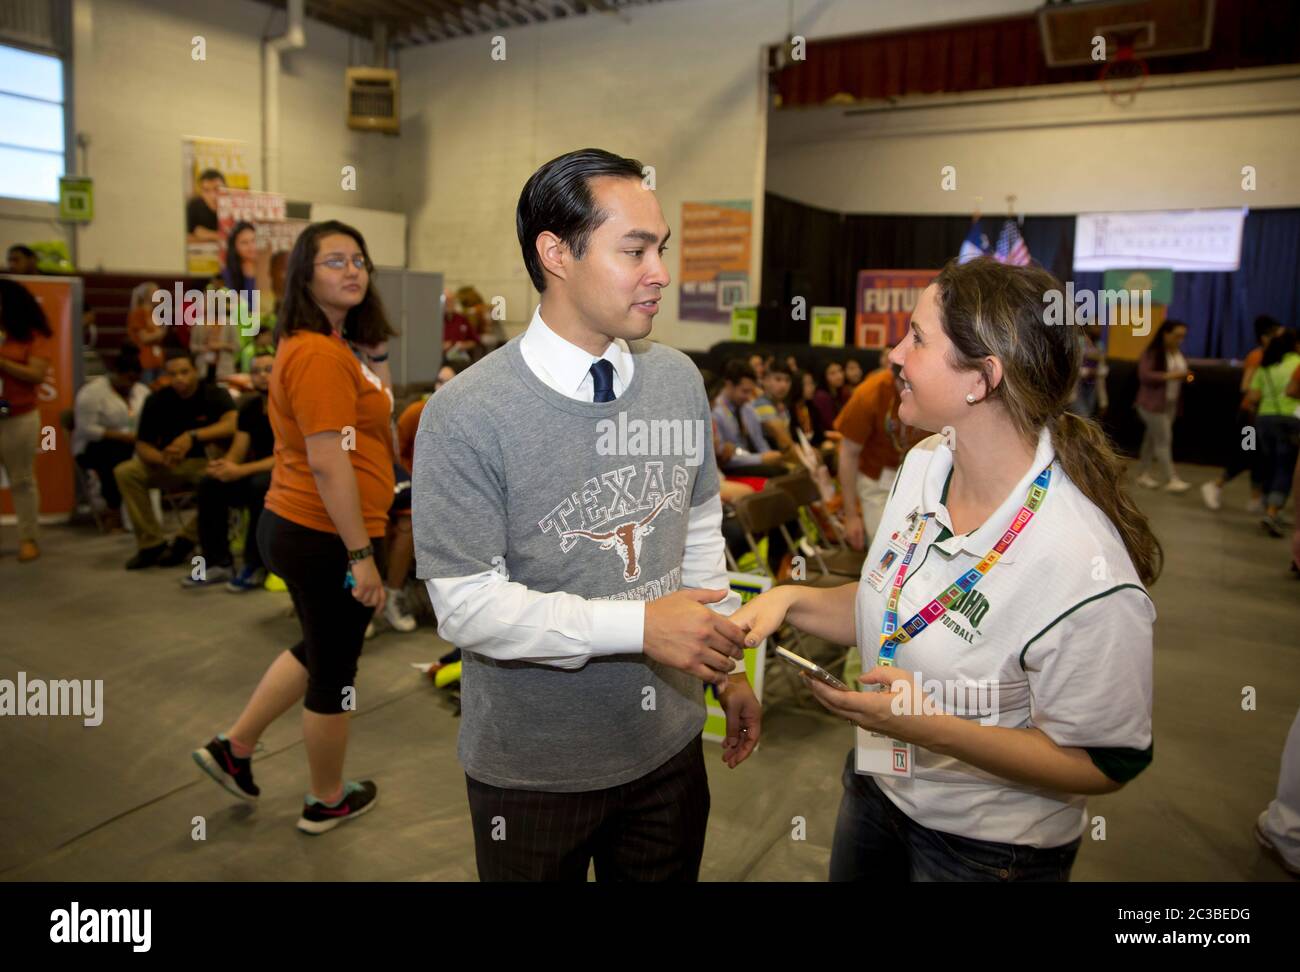 High school students sign pledge to attend college - May 1st, 2015 Austin, Texas USA: Former Mayor of San Antonio and current US Secretary of Housing and Urban Development, Julian Castro greets high school students at Huston-Tillotson University during the inaugural Generation TX Signing Day. Generation TX is a statewide movement to create a college-going culture in Texas, particularly among students who are under-represented at Texas universities and colleges.   ©Marjorie Kamys Cotera/Daemmrich Photography Stock Photo